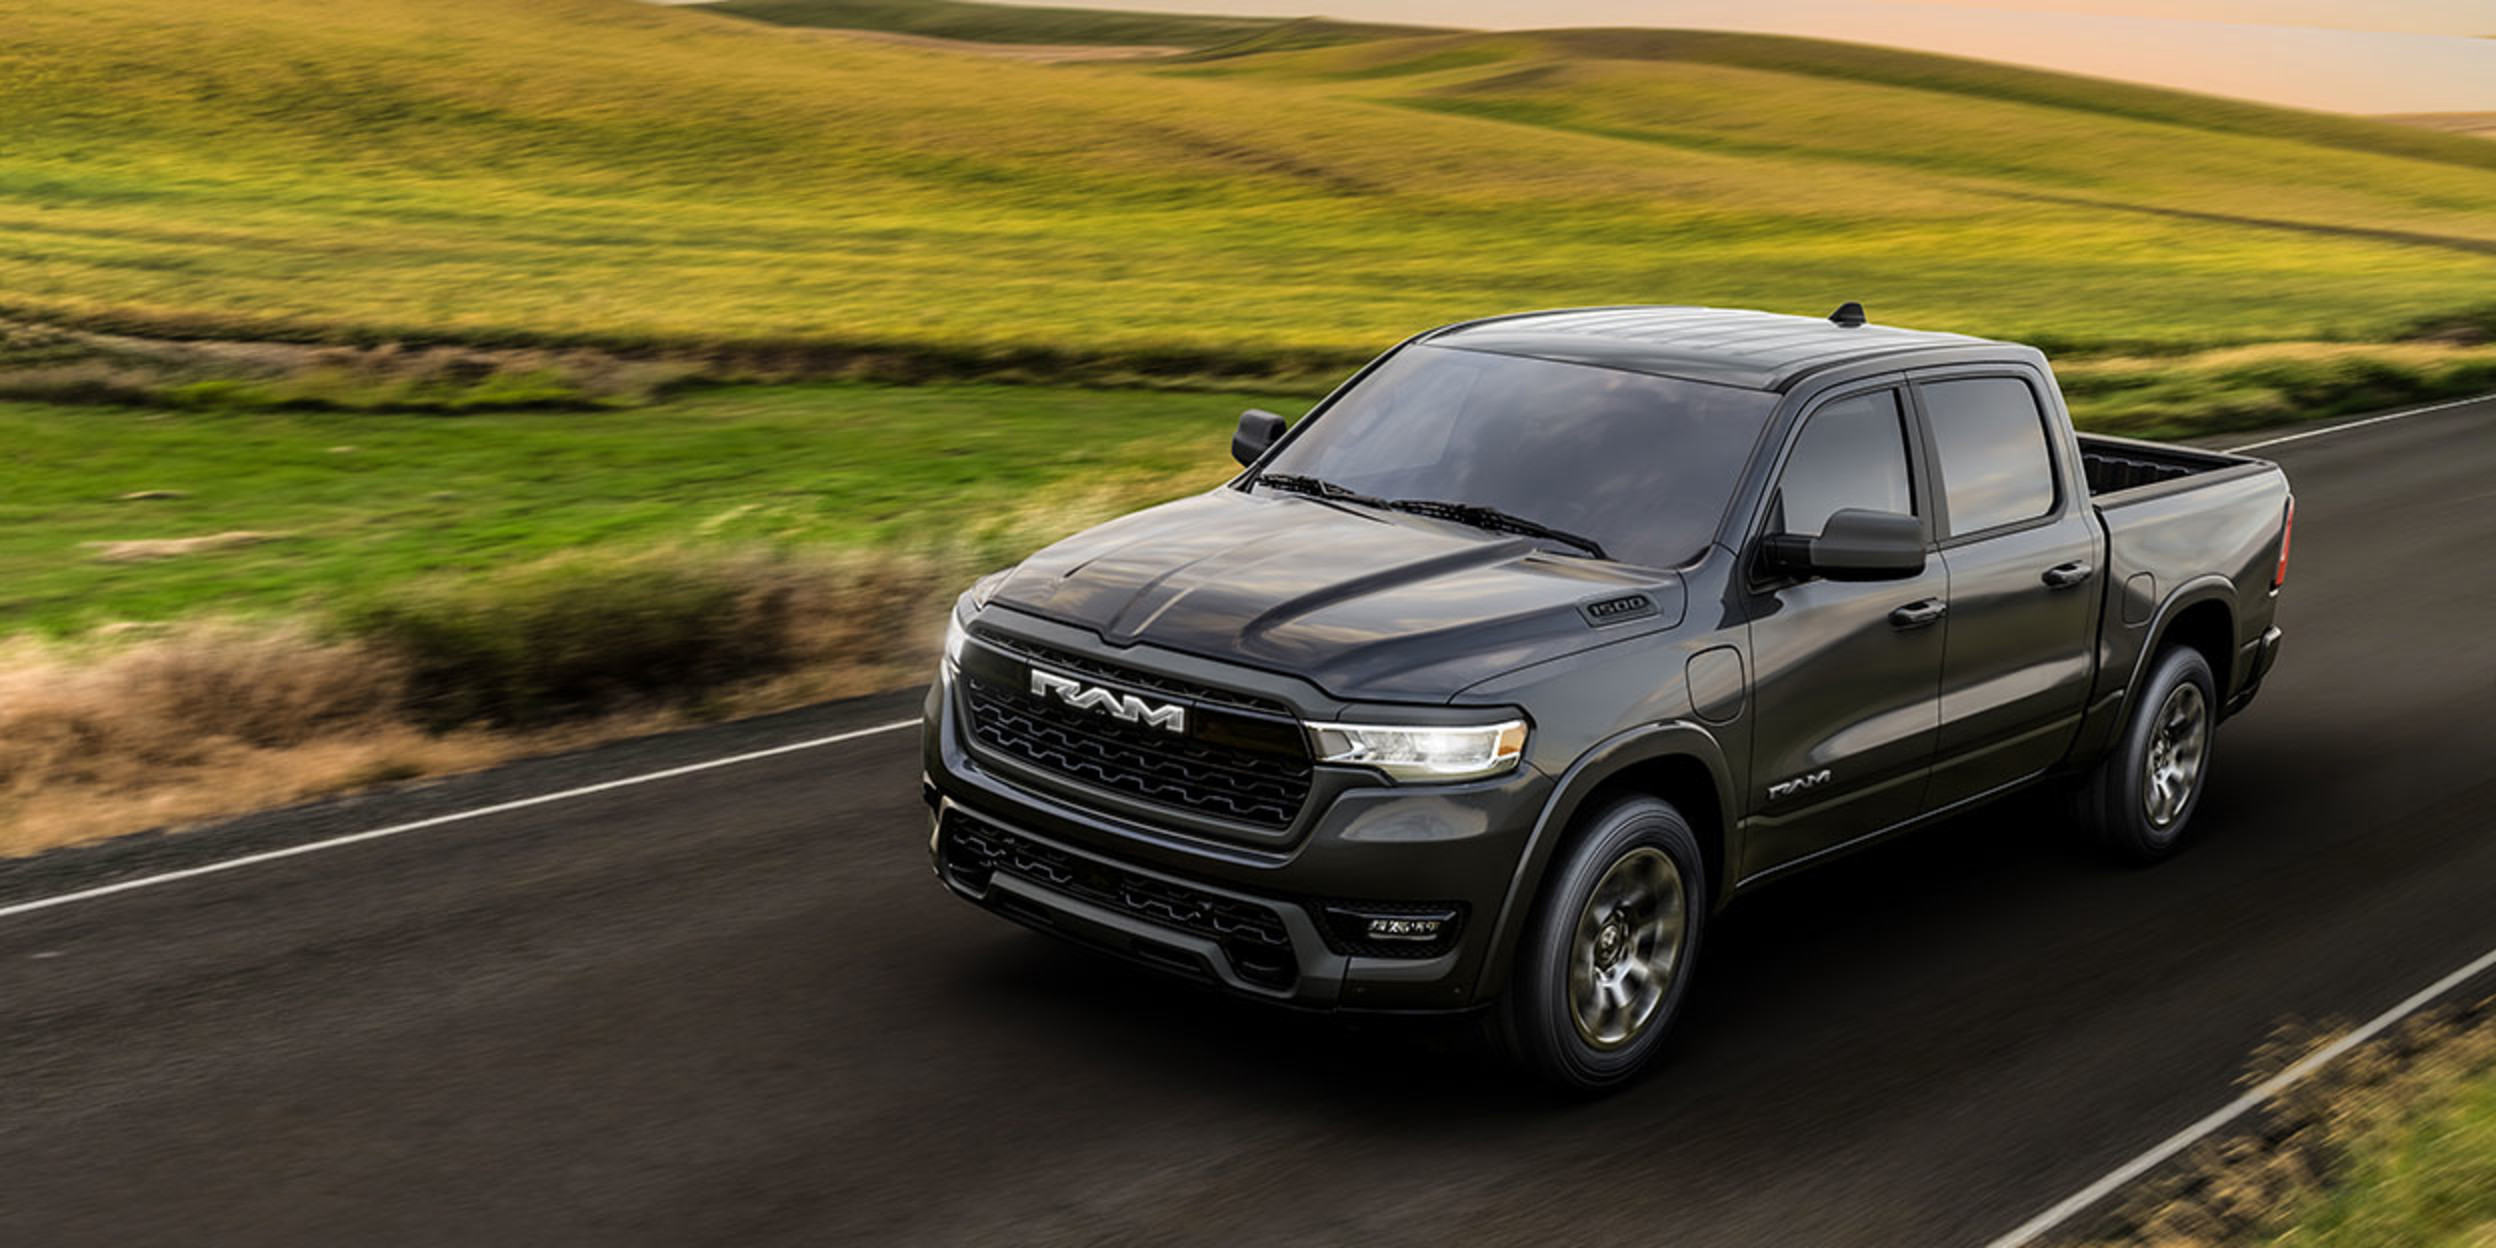 FUTURE PRODUCT: Electrifying Ram lineup comes into focus